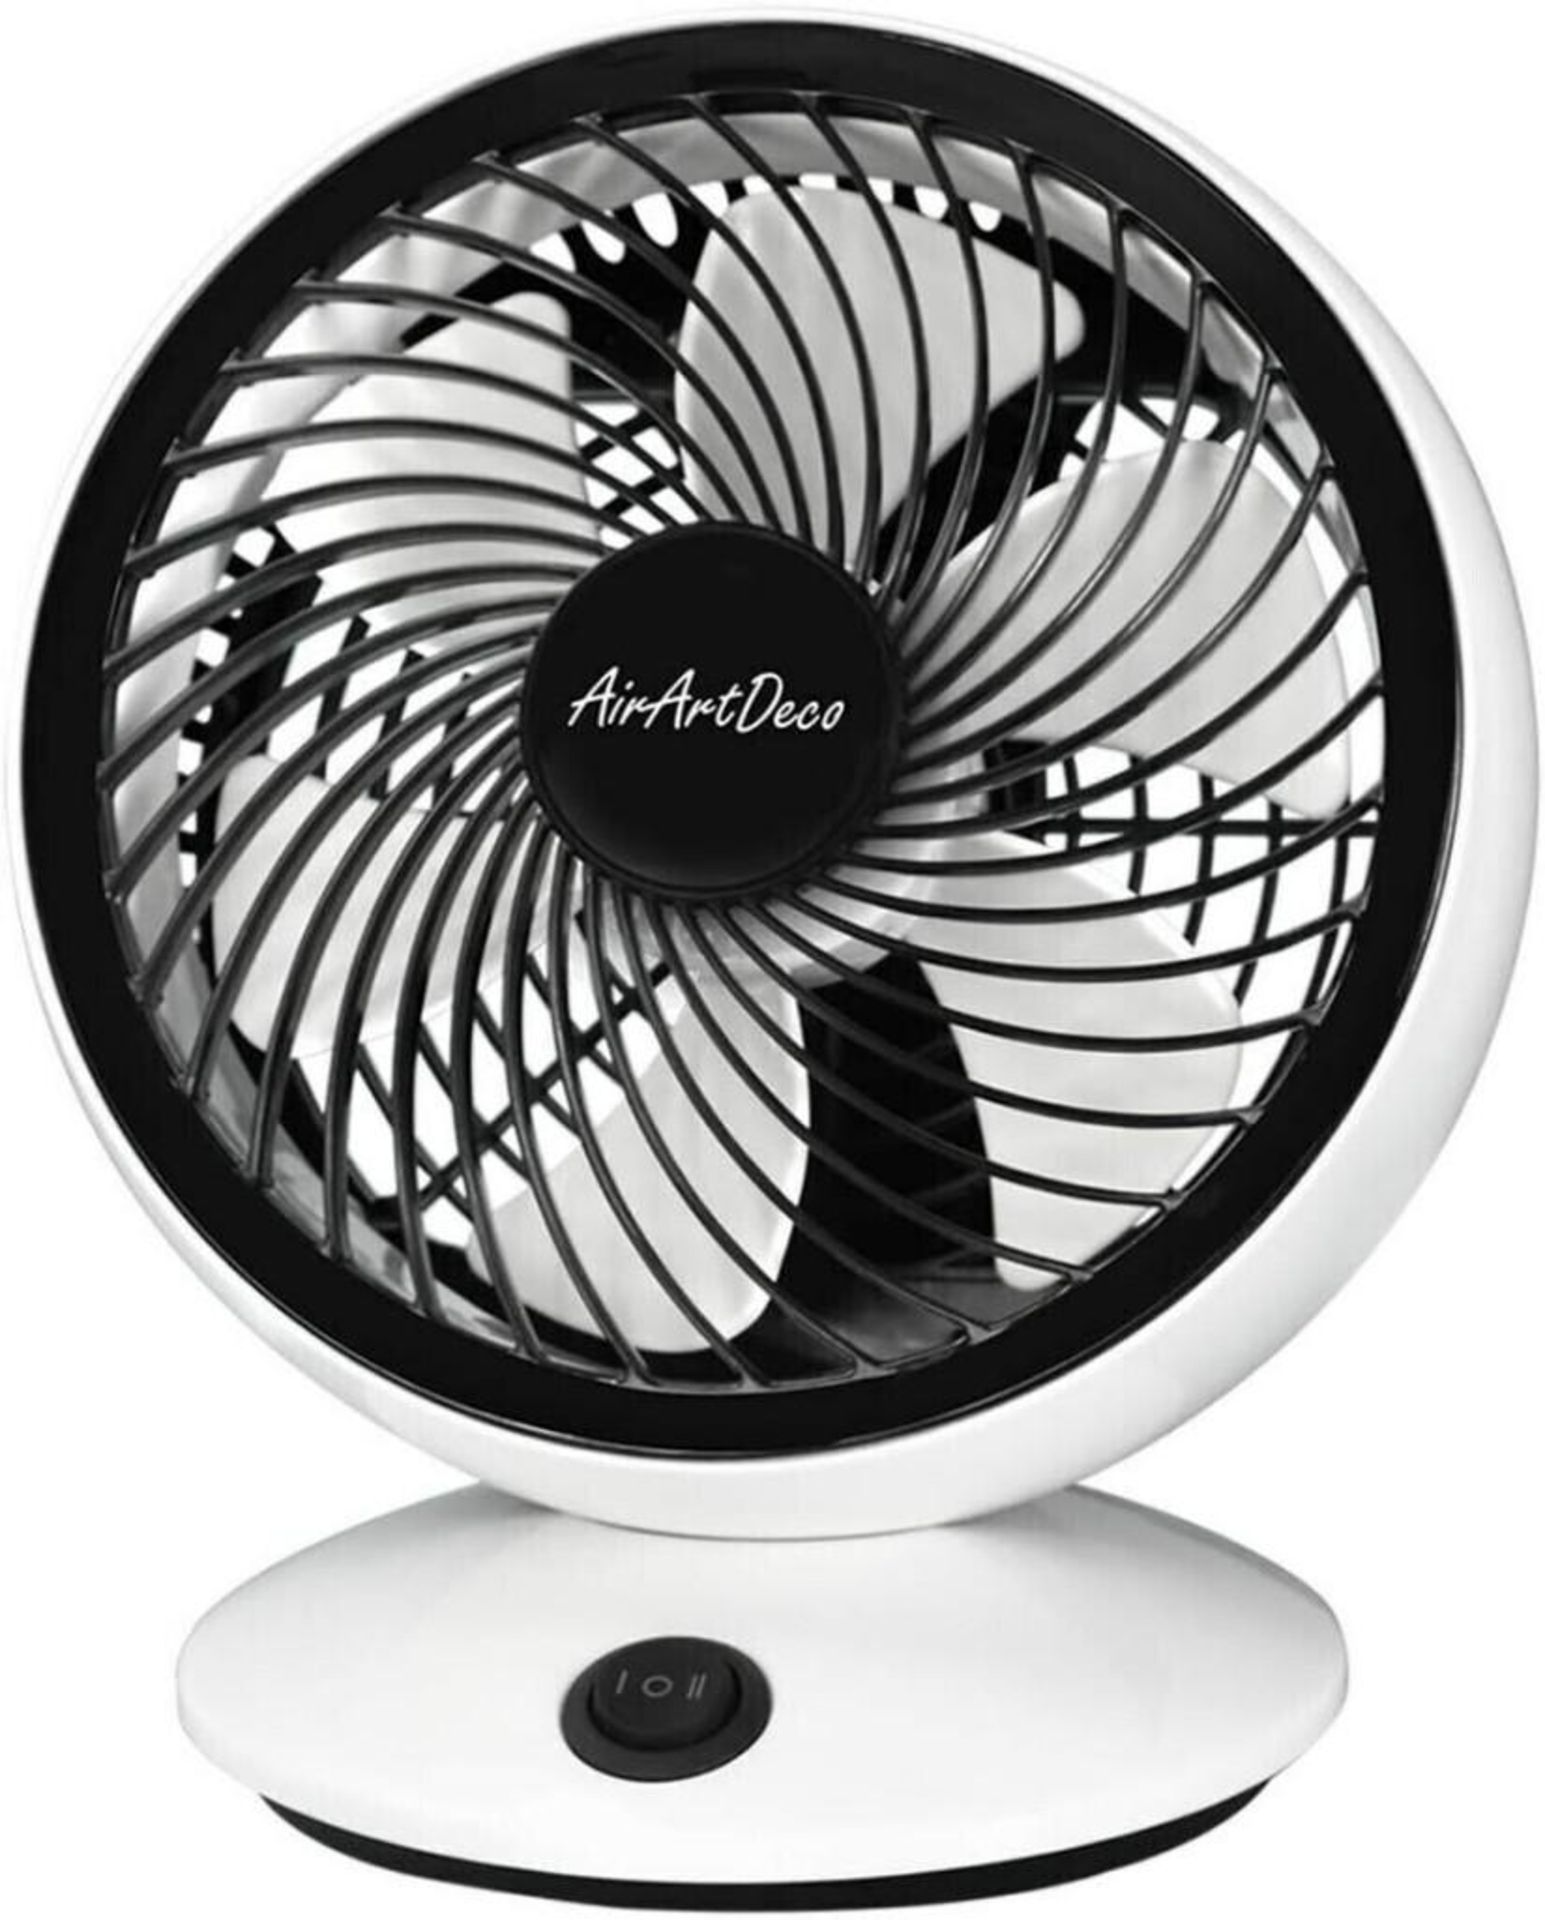 Boxed 6’ inch USB table fan RRP £240 Per box of 12